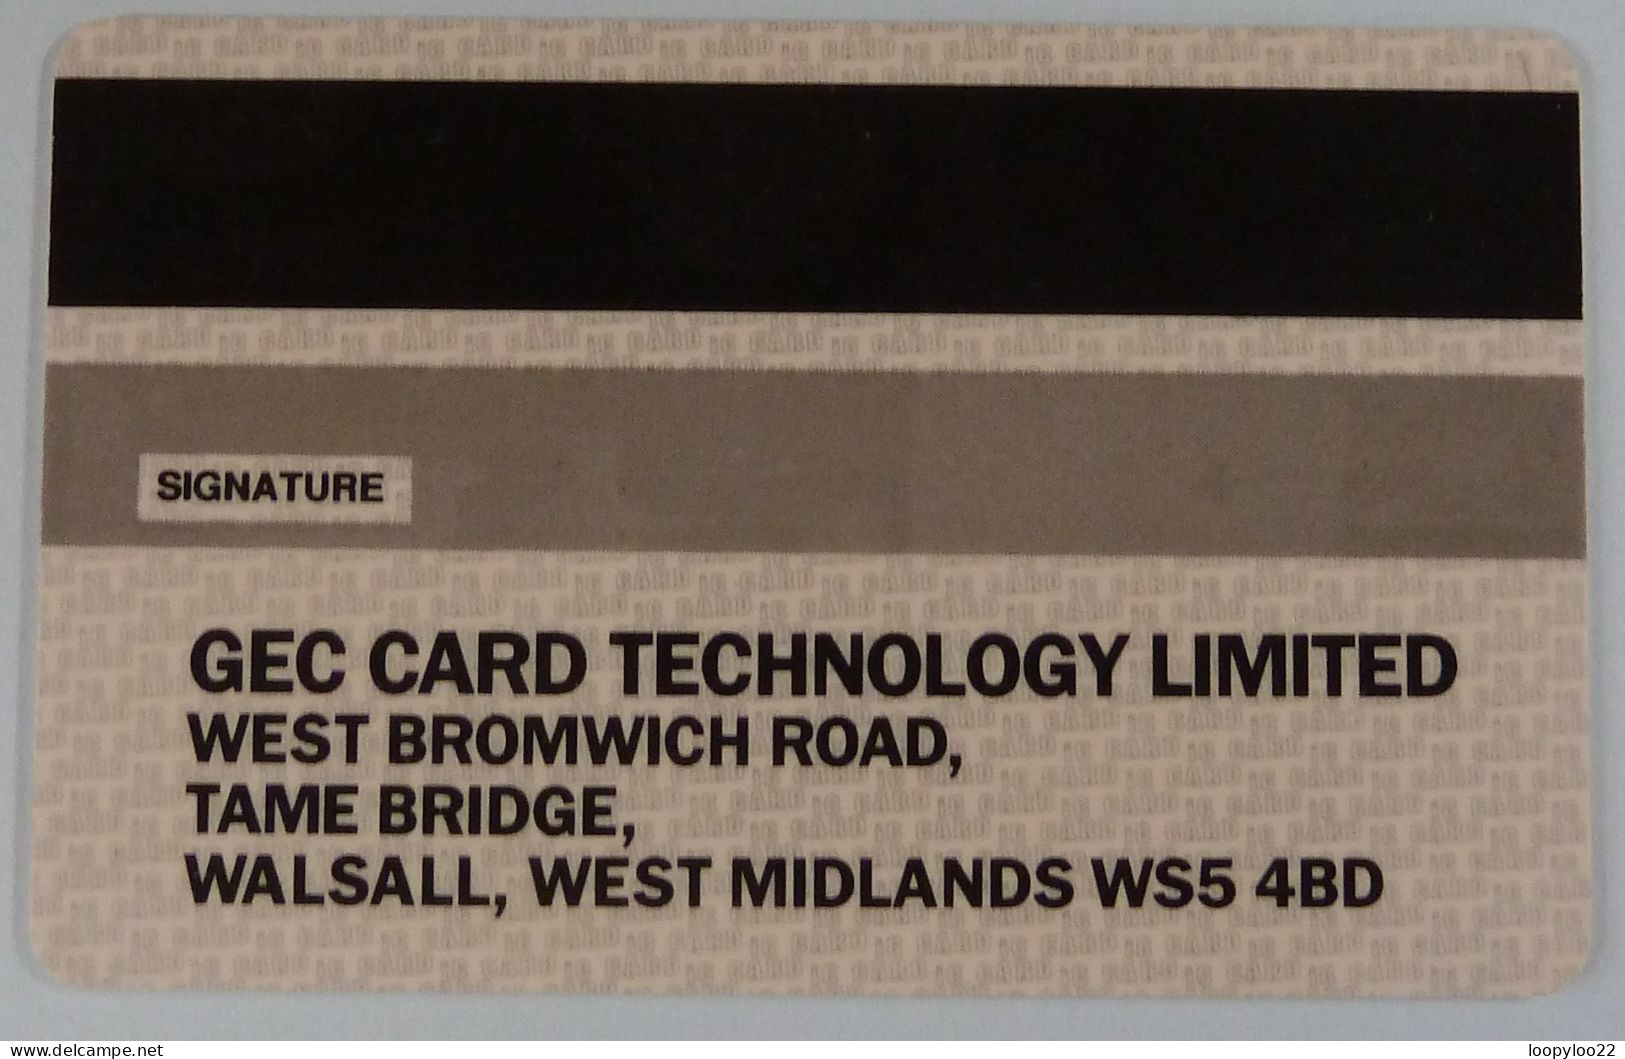 UK - Great Britain - Inteligent Contactless - IC Card - Demo For GEC Card Technology - Collezioni